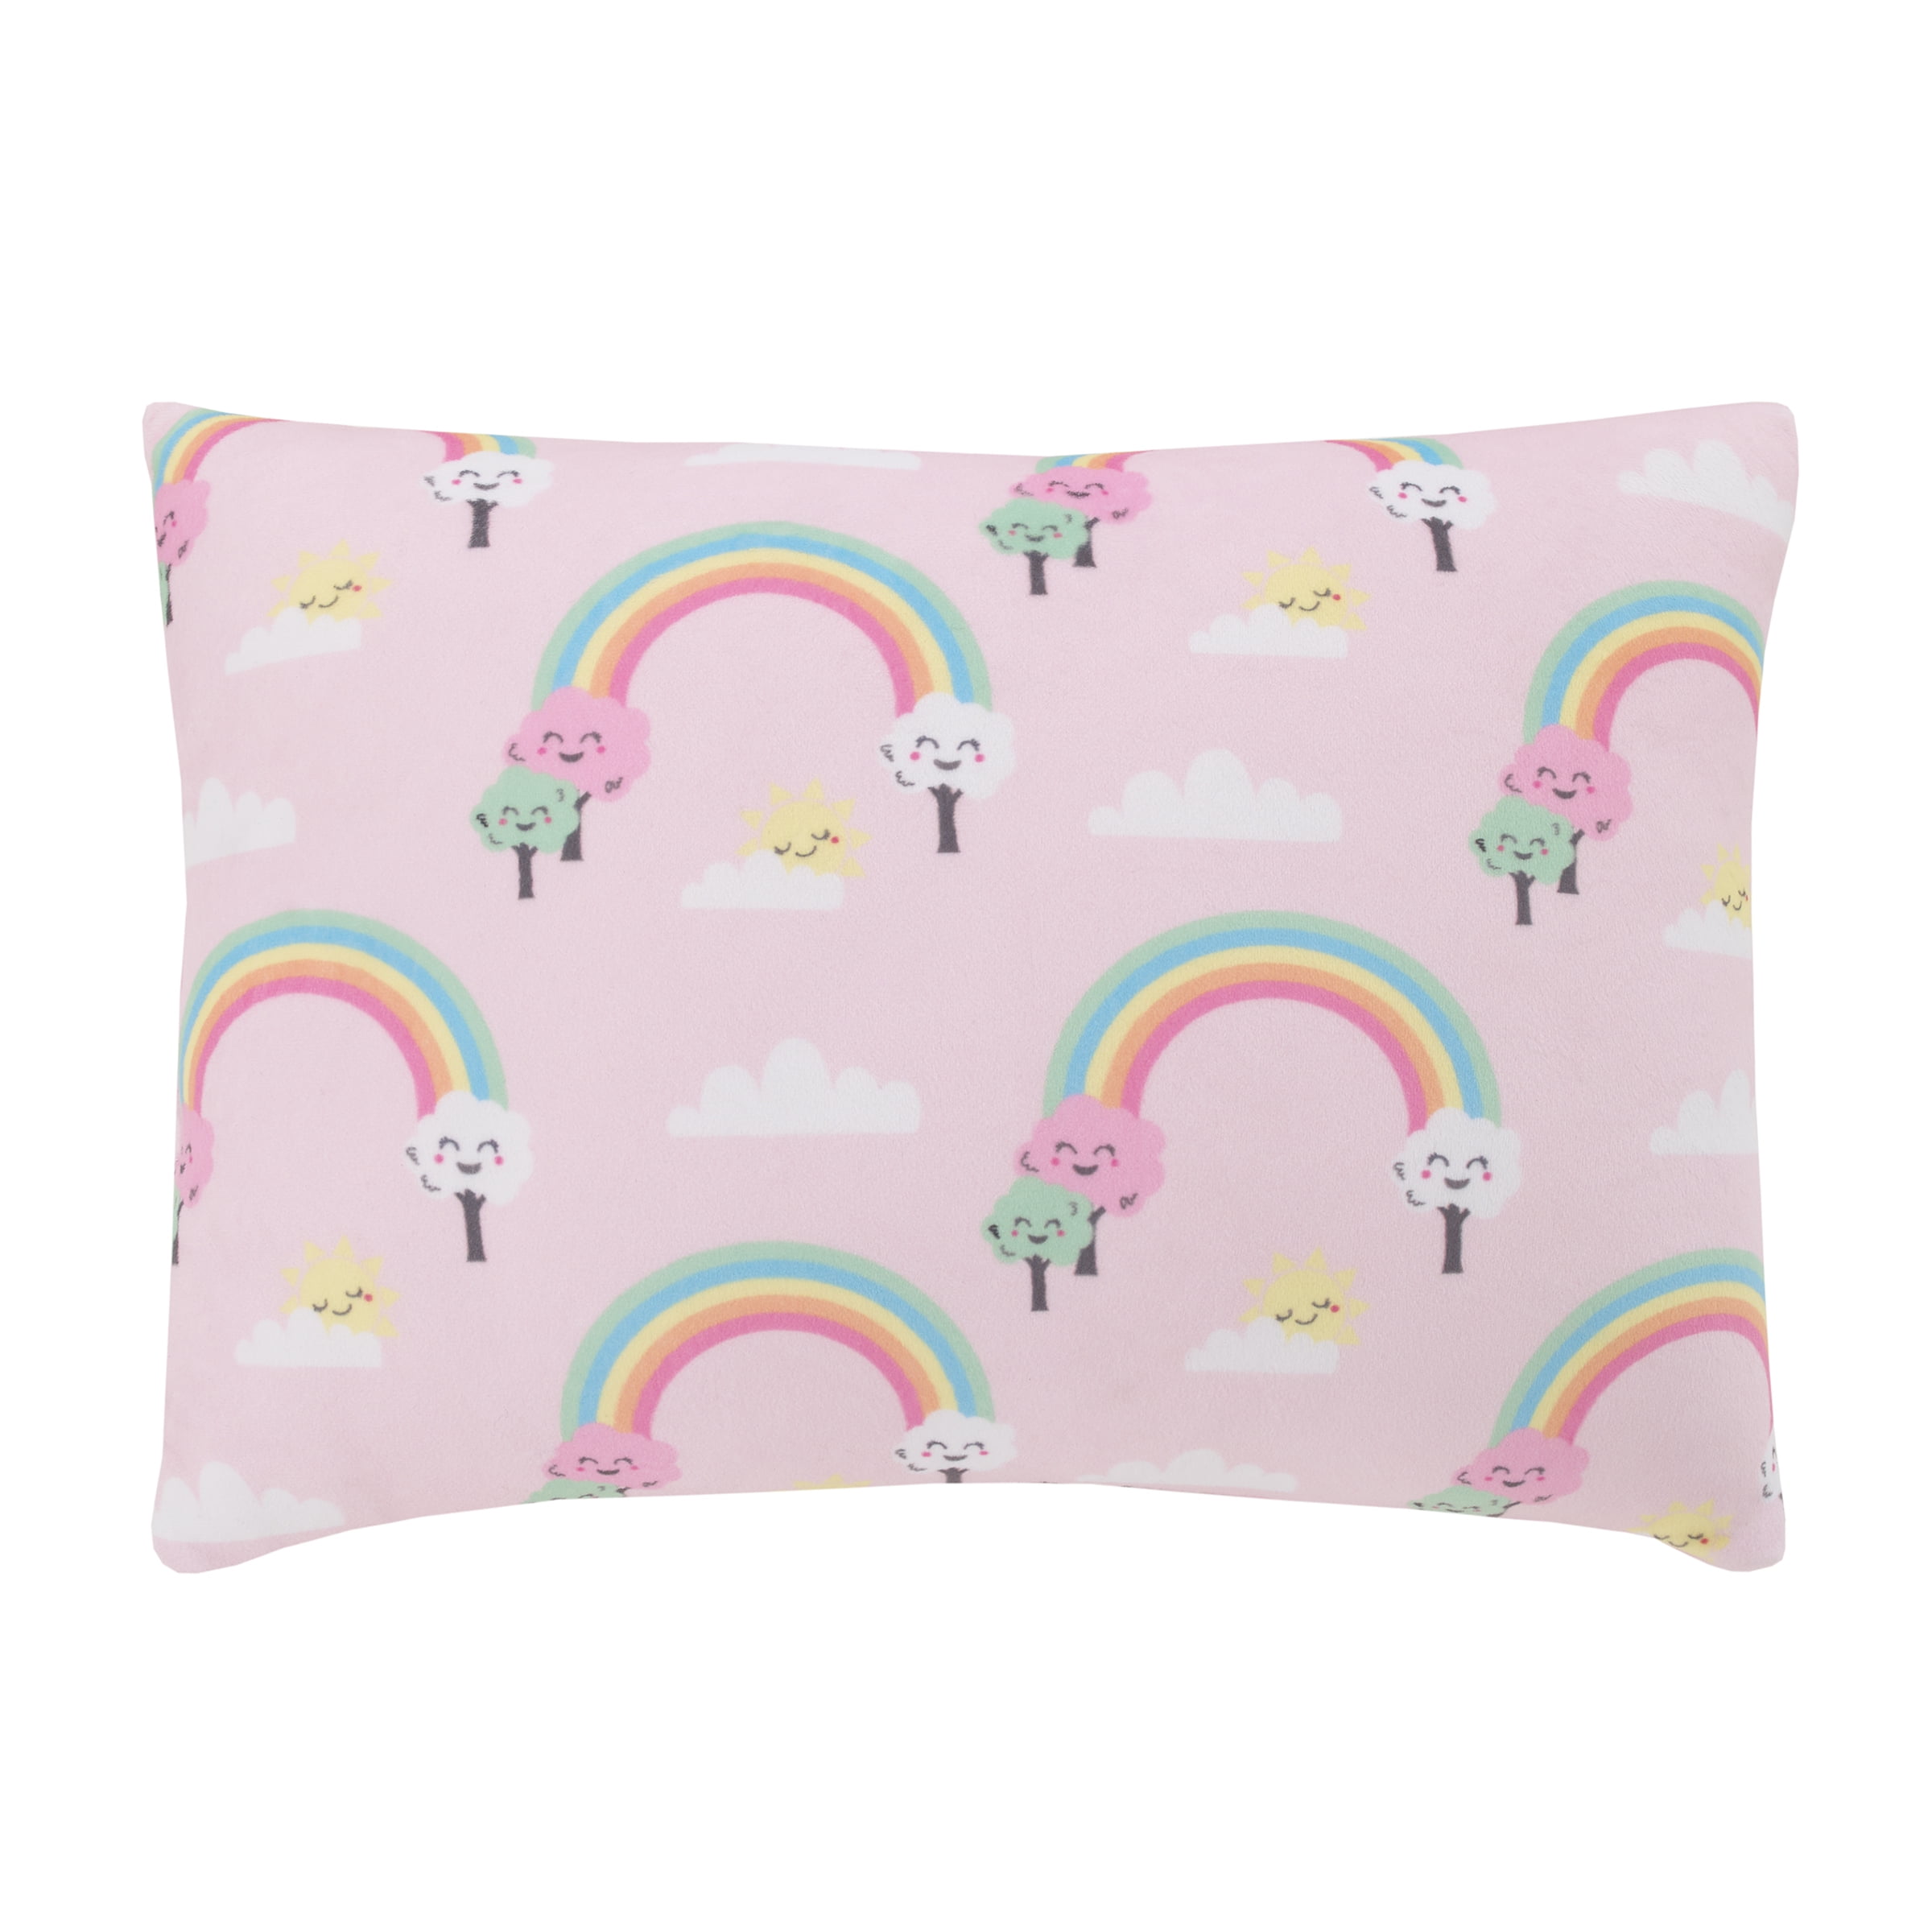 Rainbow Throw Pillow Super Soft And Squishy New With Tags 20" x 10" 